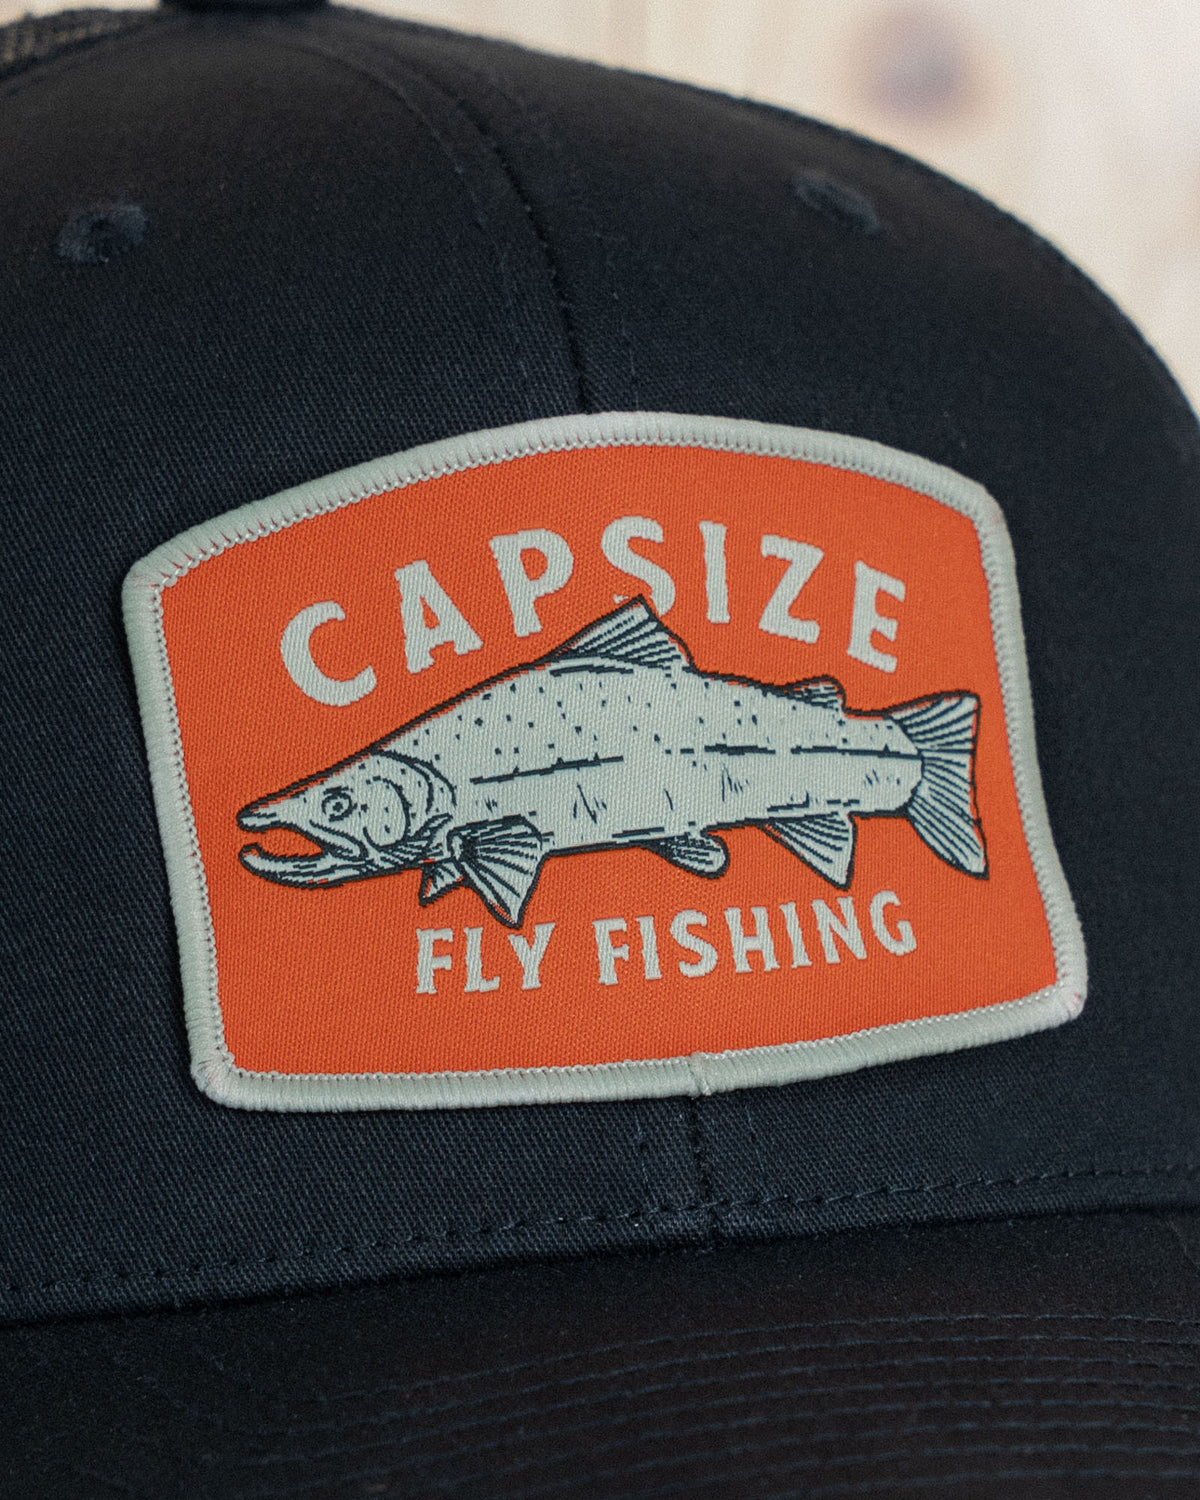 Fly Fishing Hats  Capsize Fly Fishing Tagged Vintage